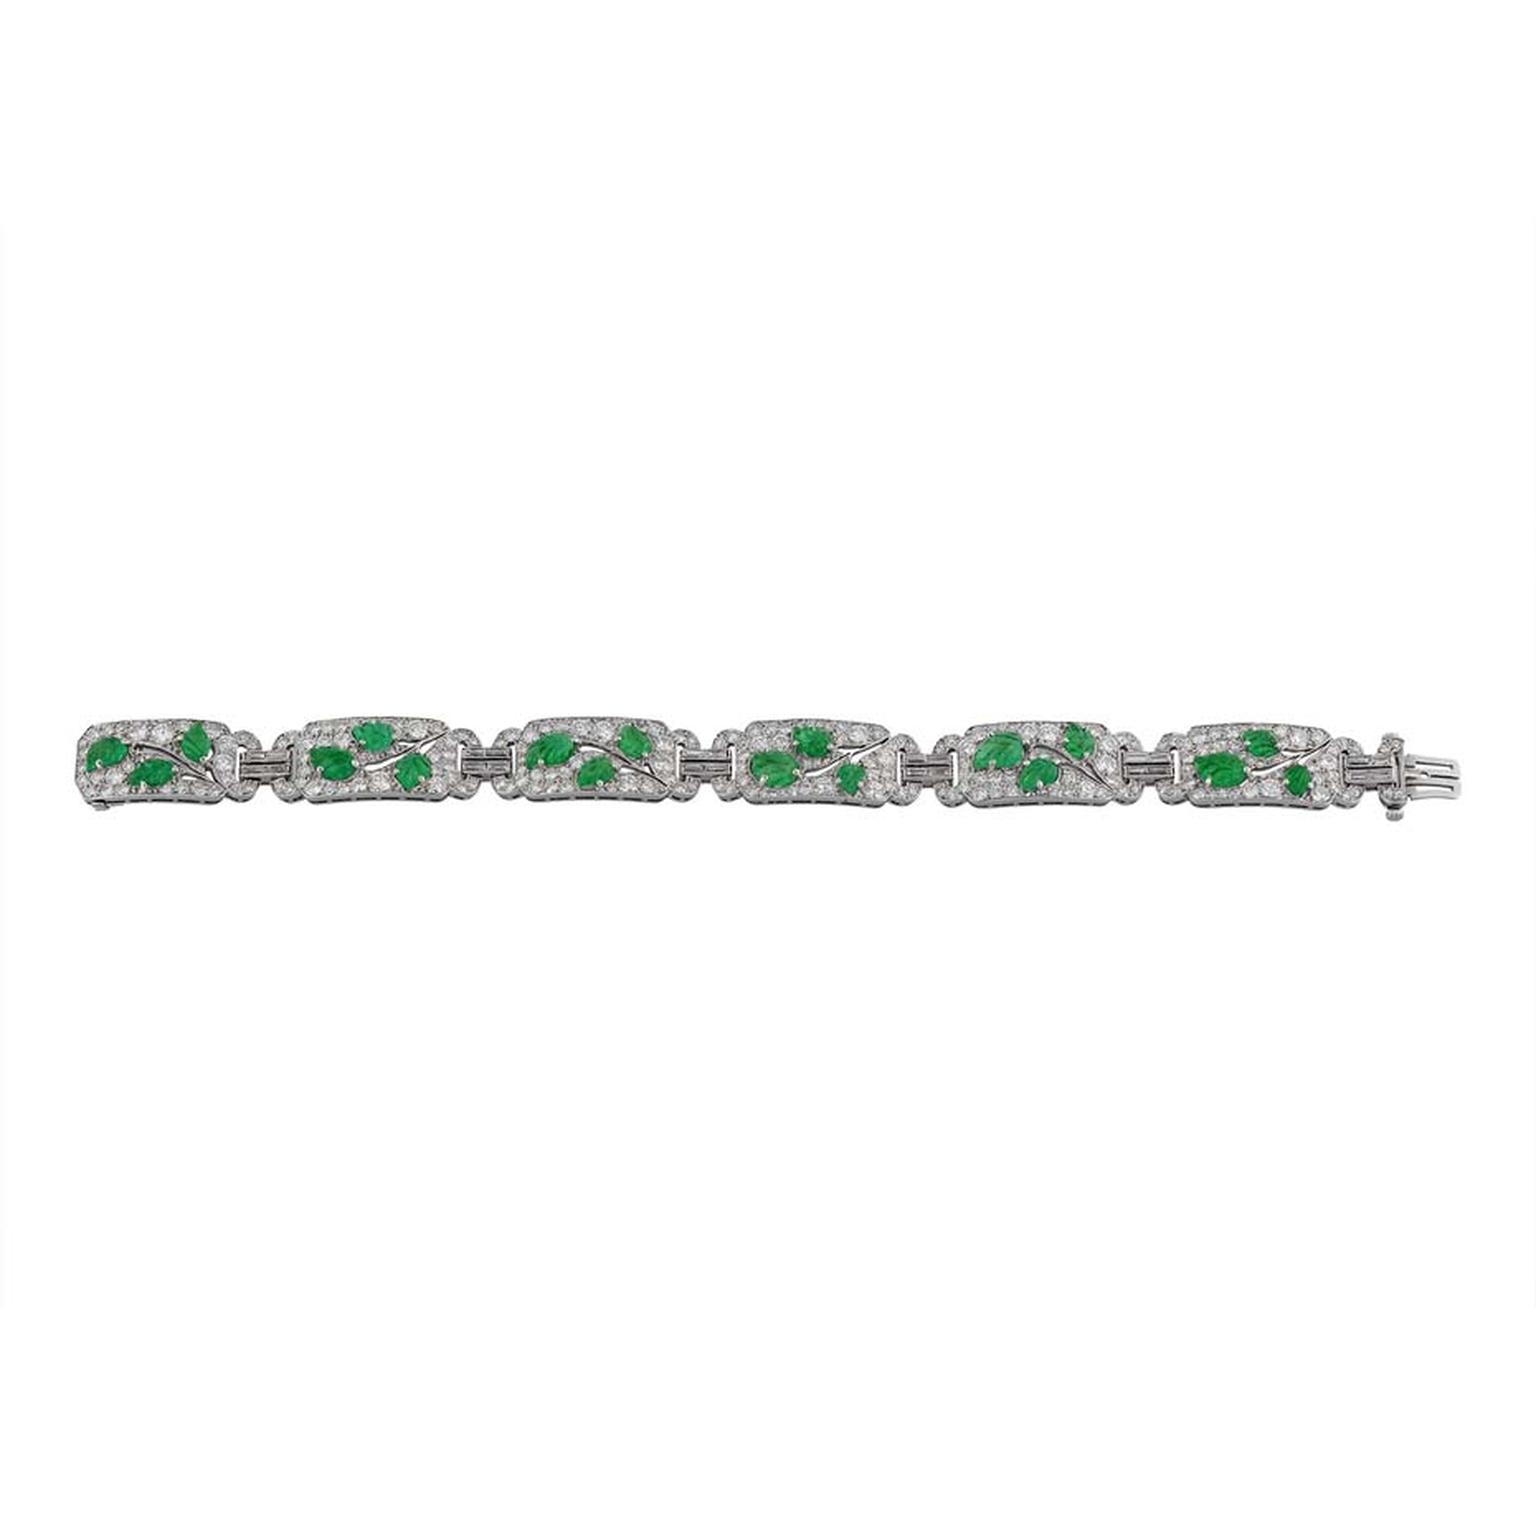 Morelle Davidson vintage Cartier bracelet in platinum with six diamond-pavéd openwork sections, each with three carved emerald leaves forming a branch with baguette diamond-set double links.